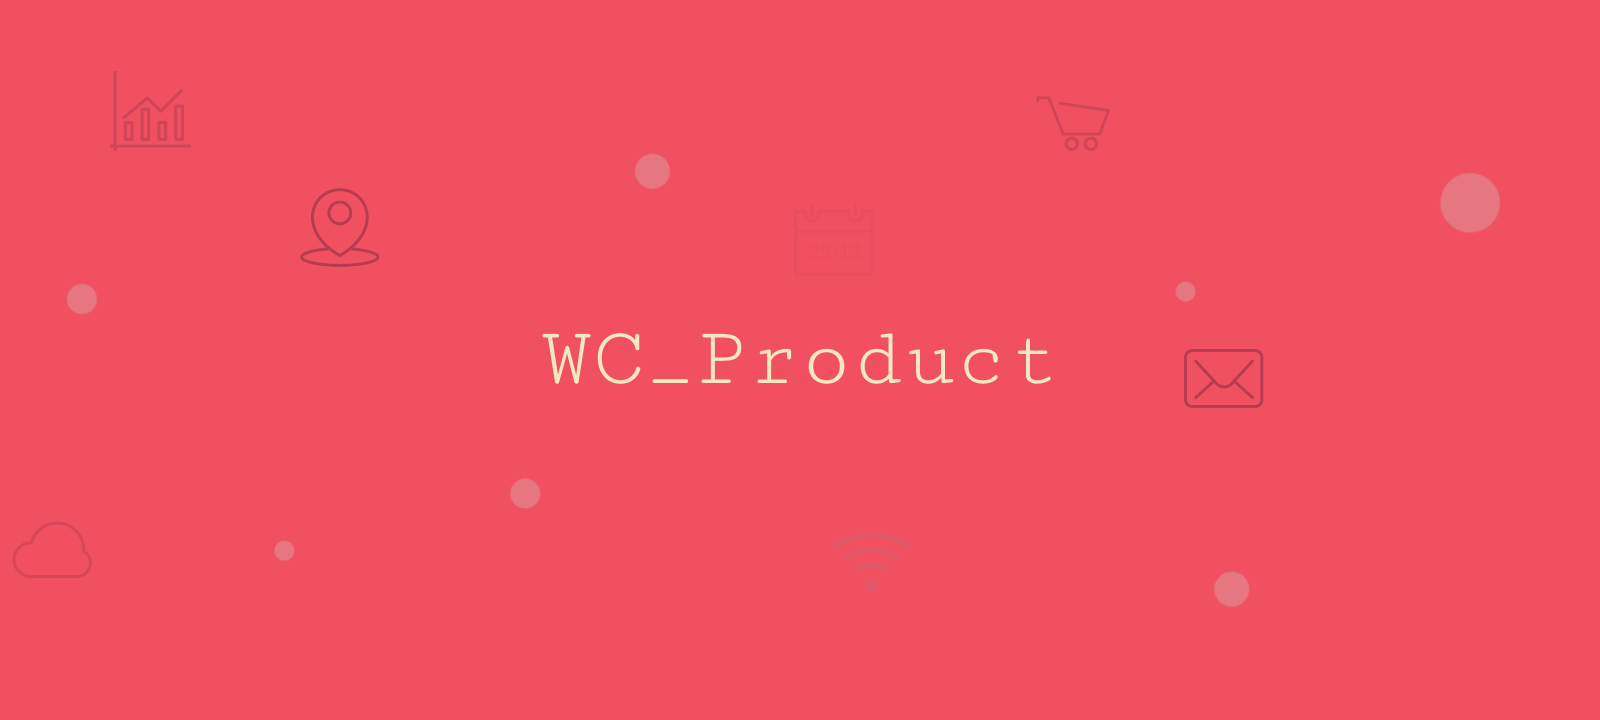 wc_product class